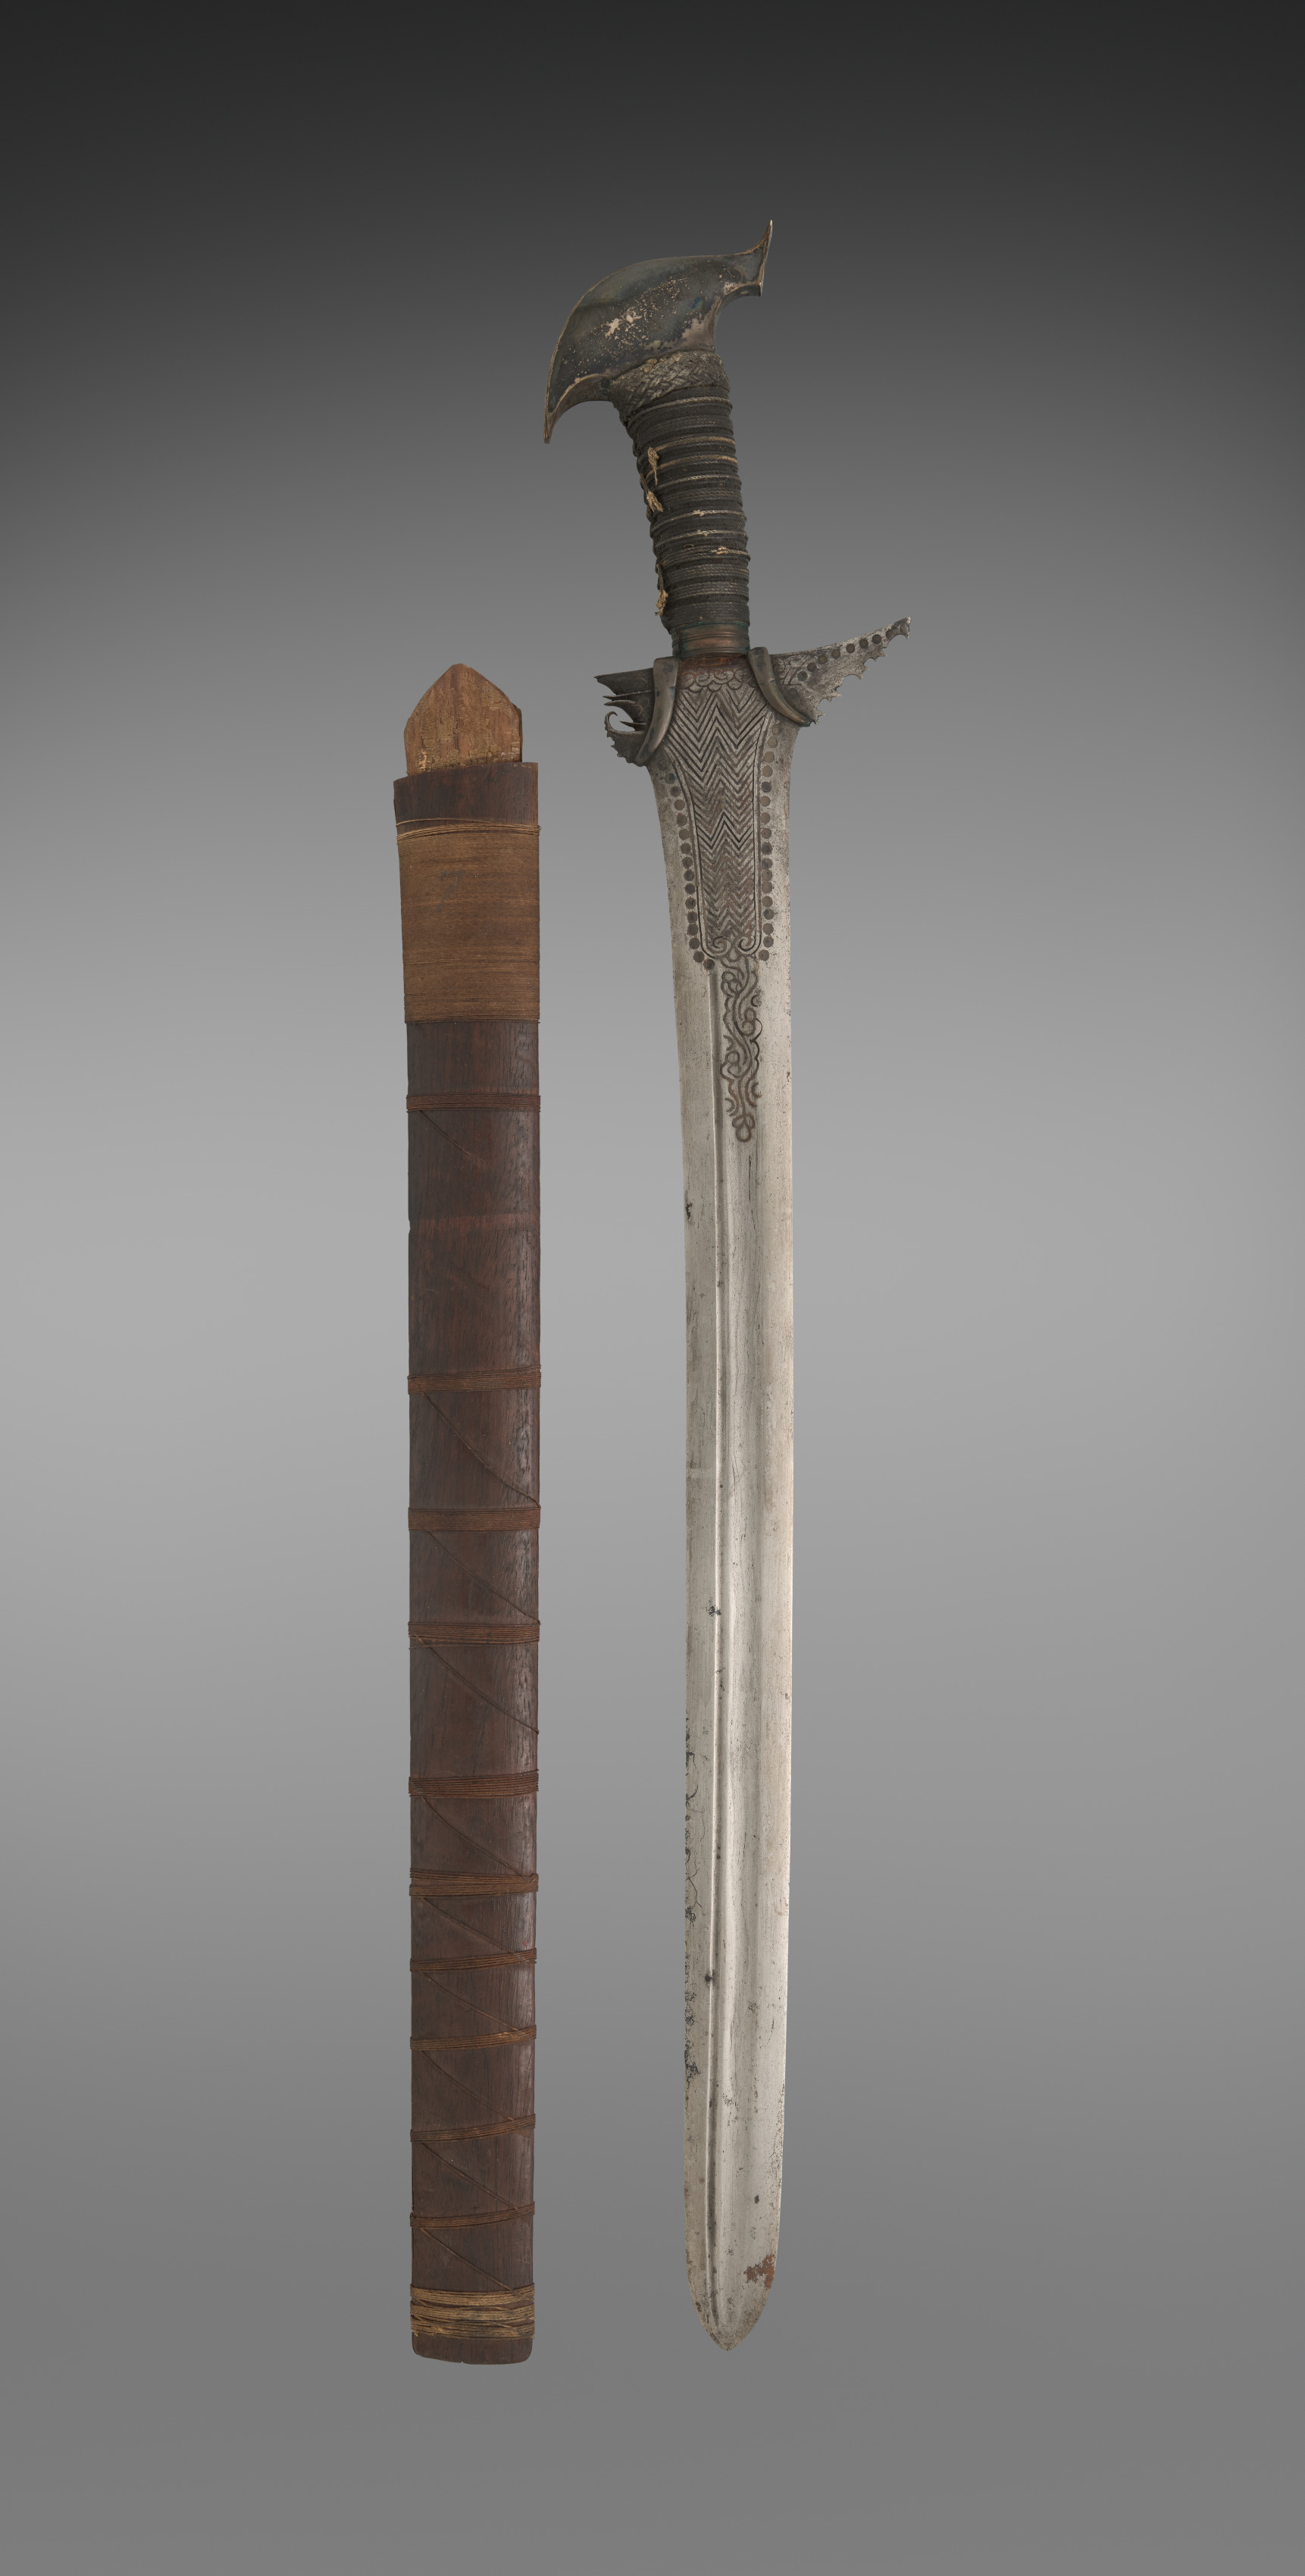 Sword (Kris) and Scabbard